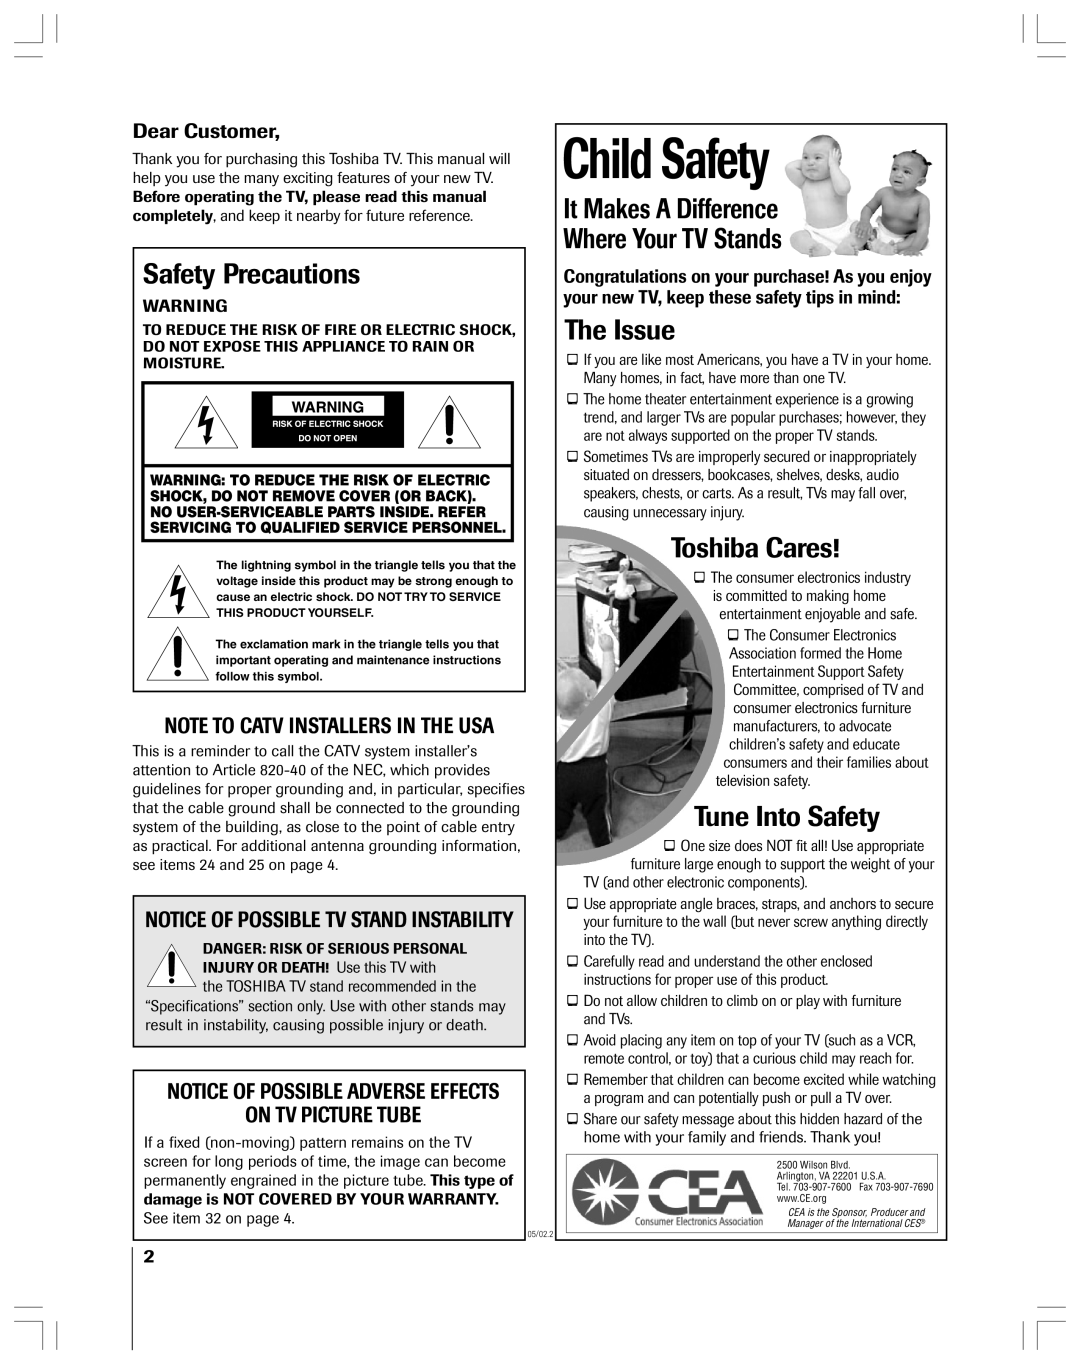 Toshiba 53AX62 Safety Precautions, It Makes A Difference Where Your TV Stands, The Issue, Toshiba Cares, Tune Into Safety 